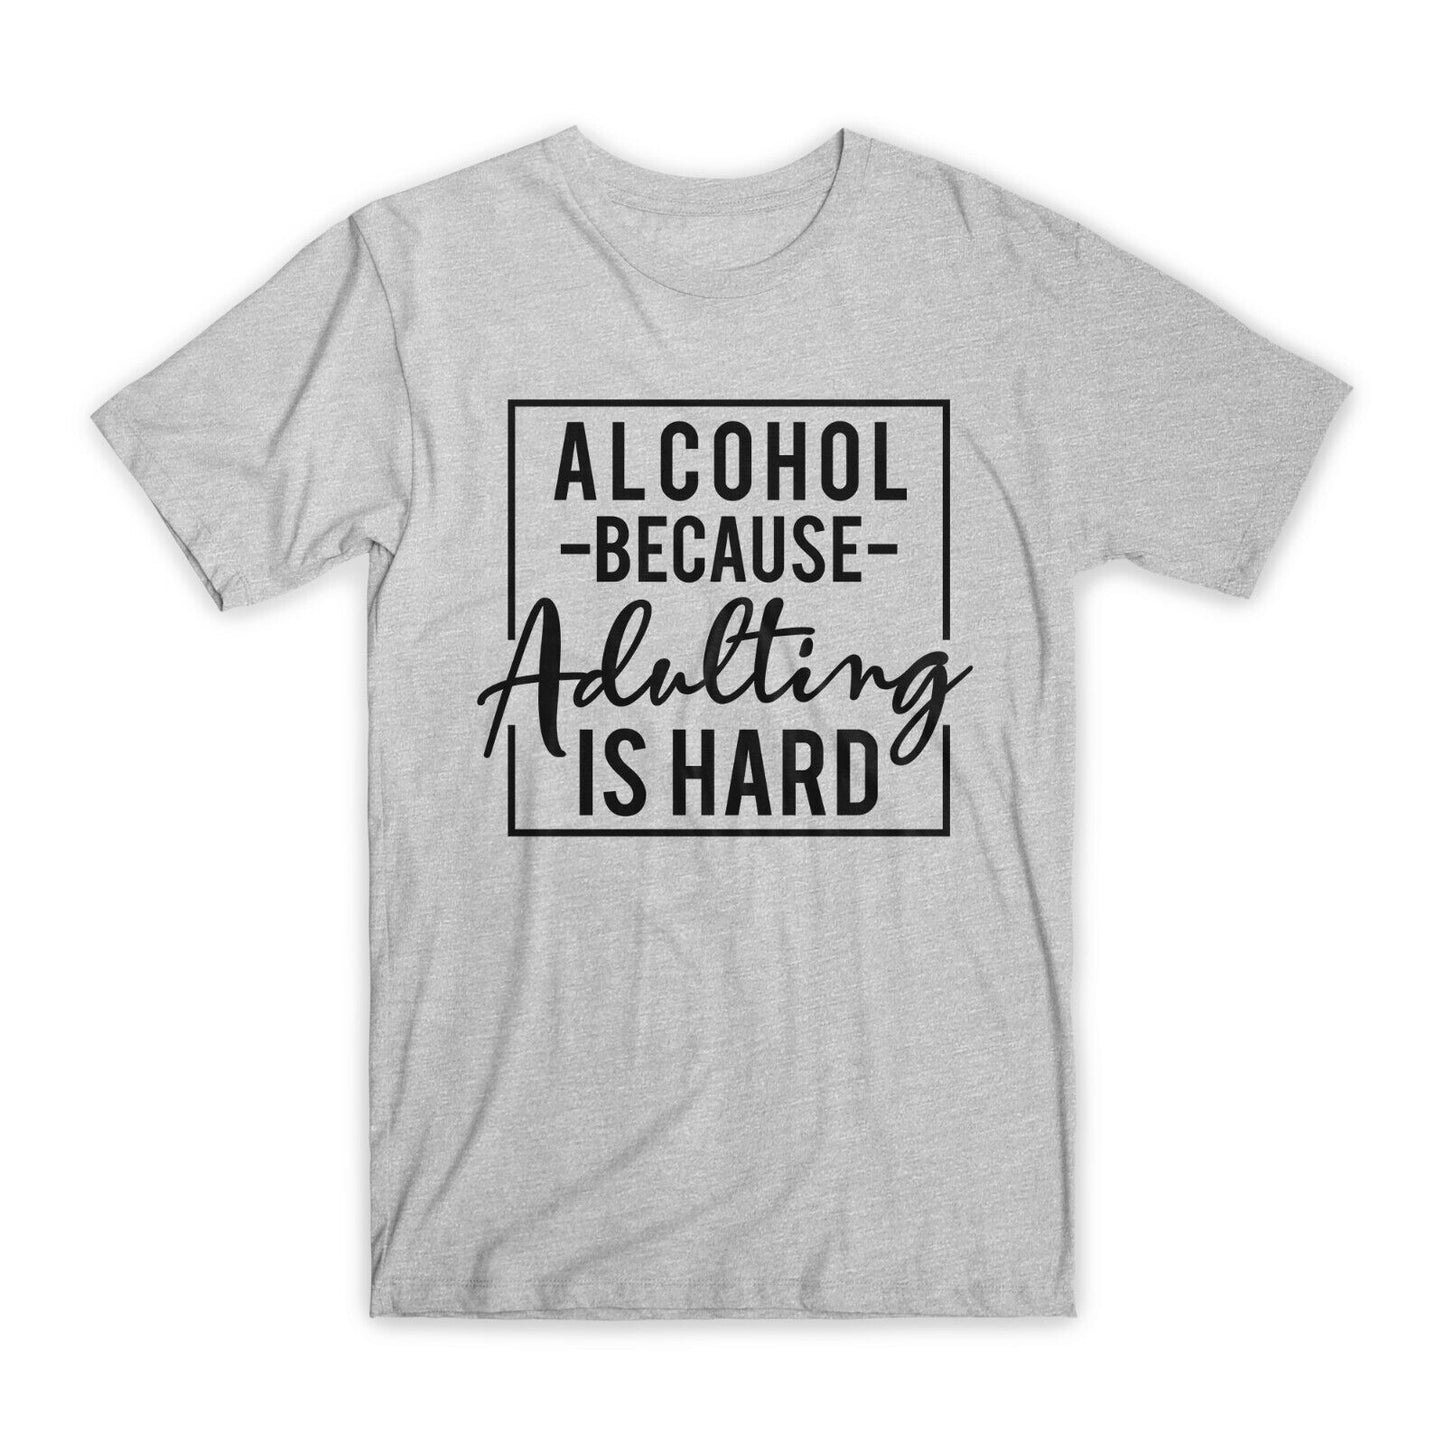 Alcohol Because Adulting is Hard T-Shirt Premium Soft Cotton Funny Tees Gift NEW